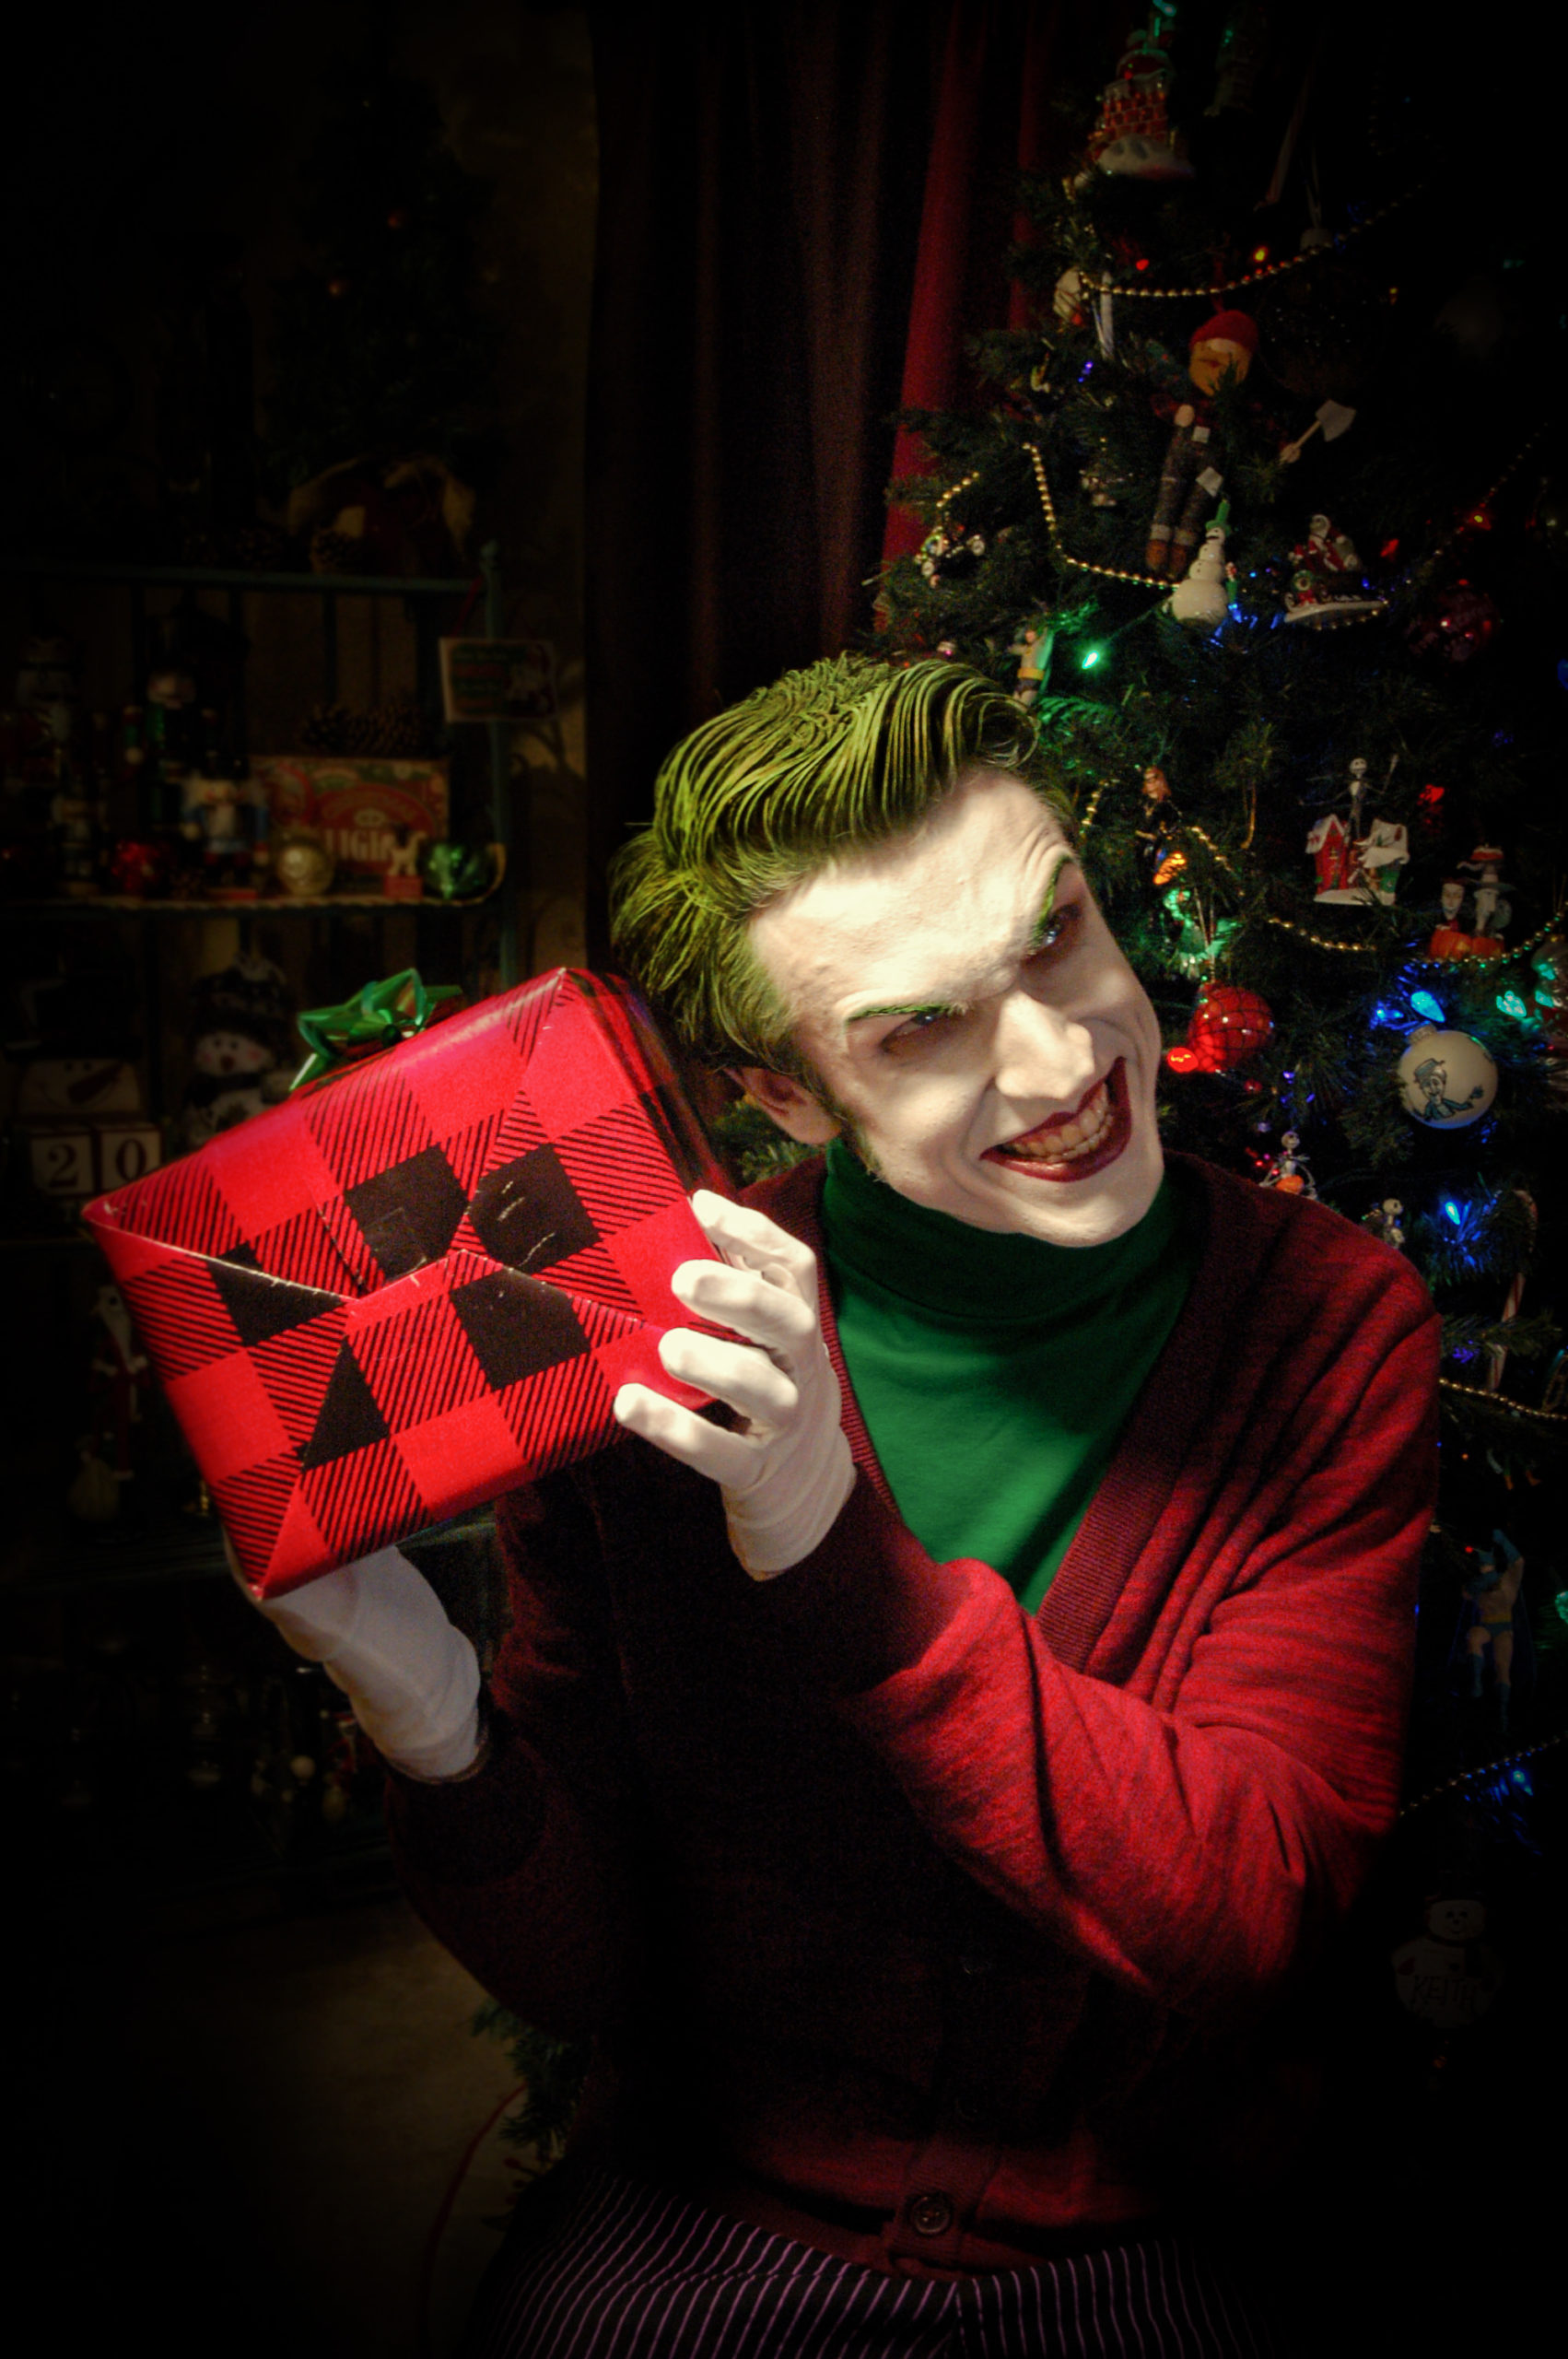 The Joker Wishes You All A Very Scary Christmas